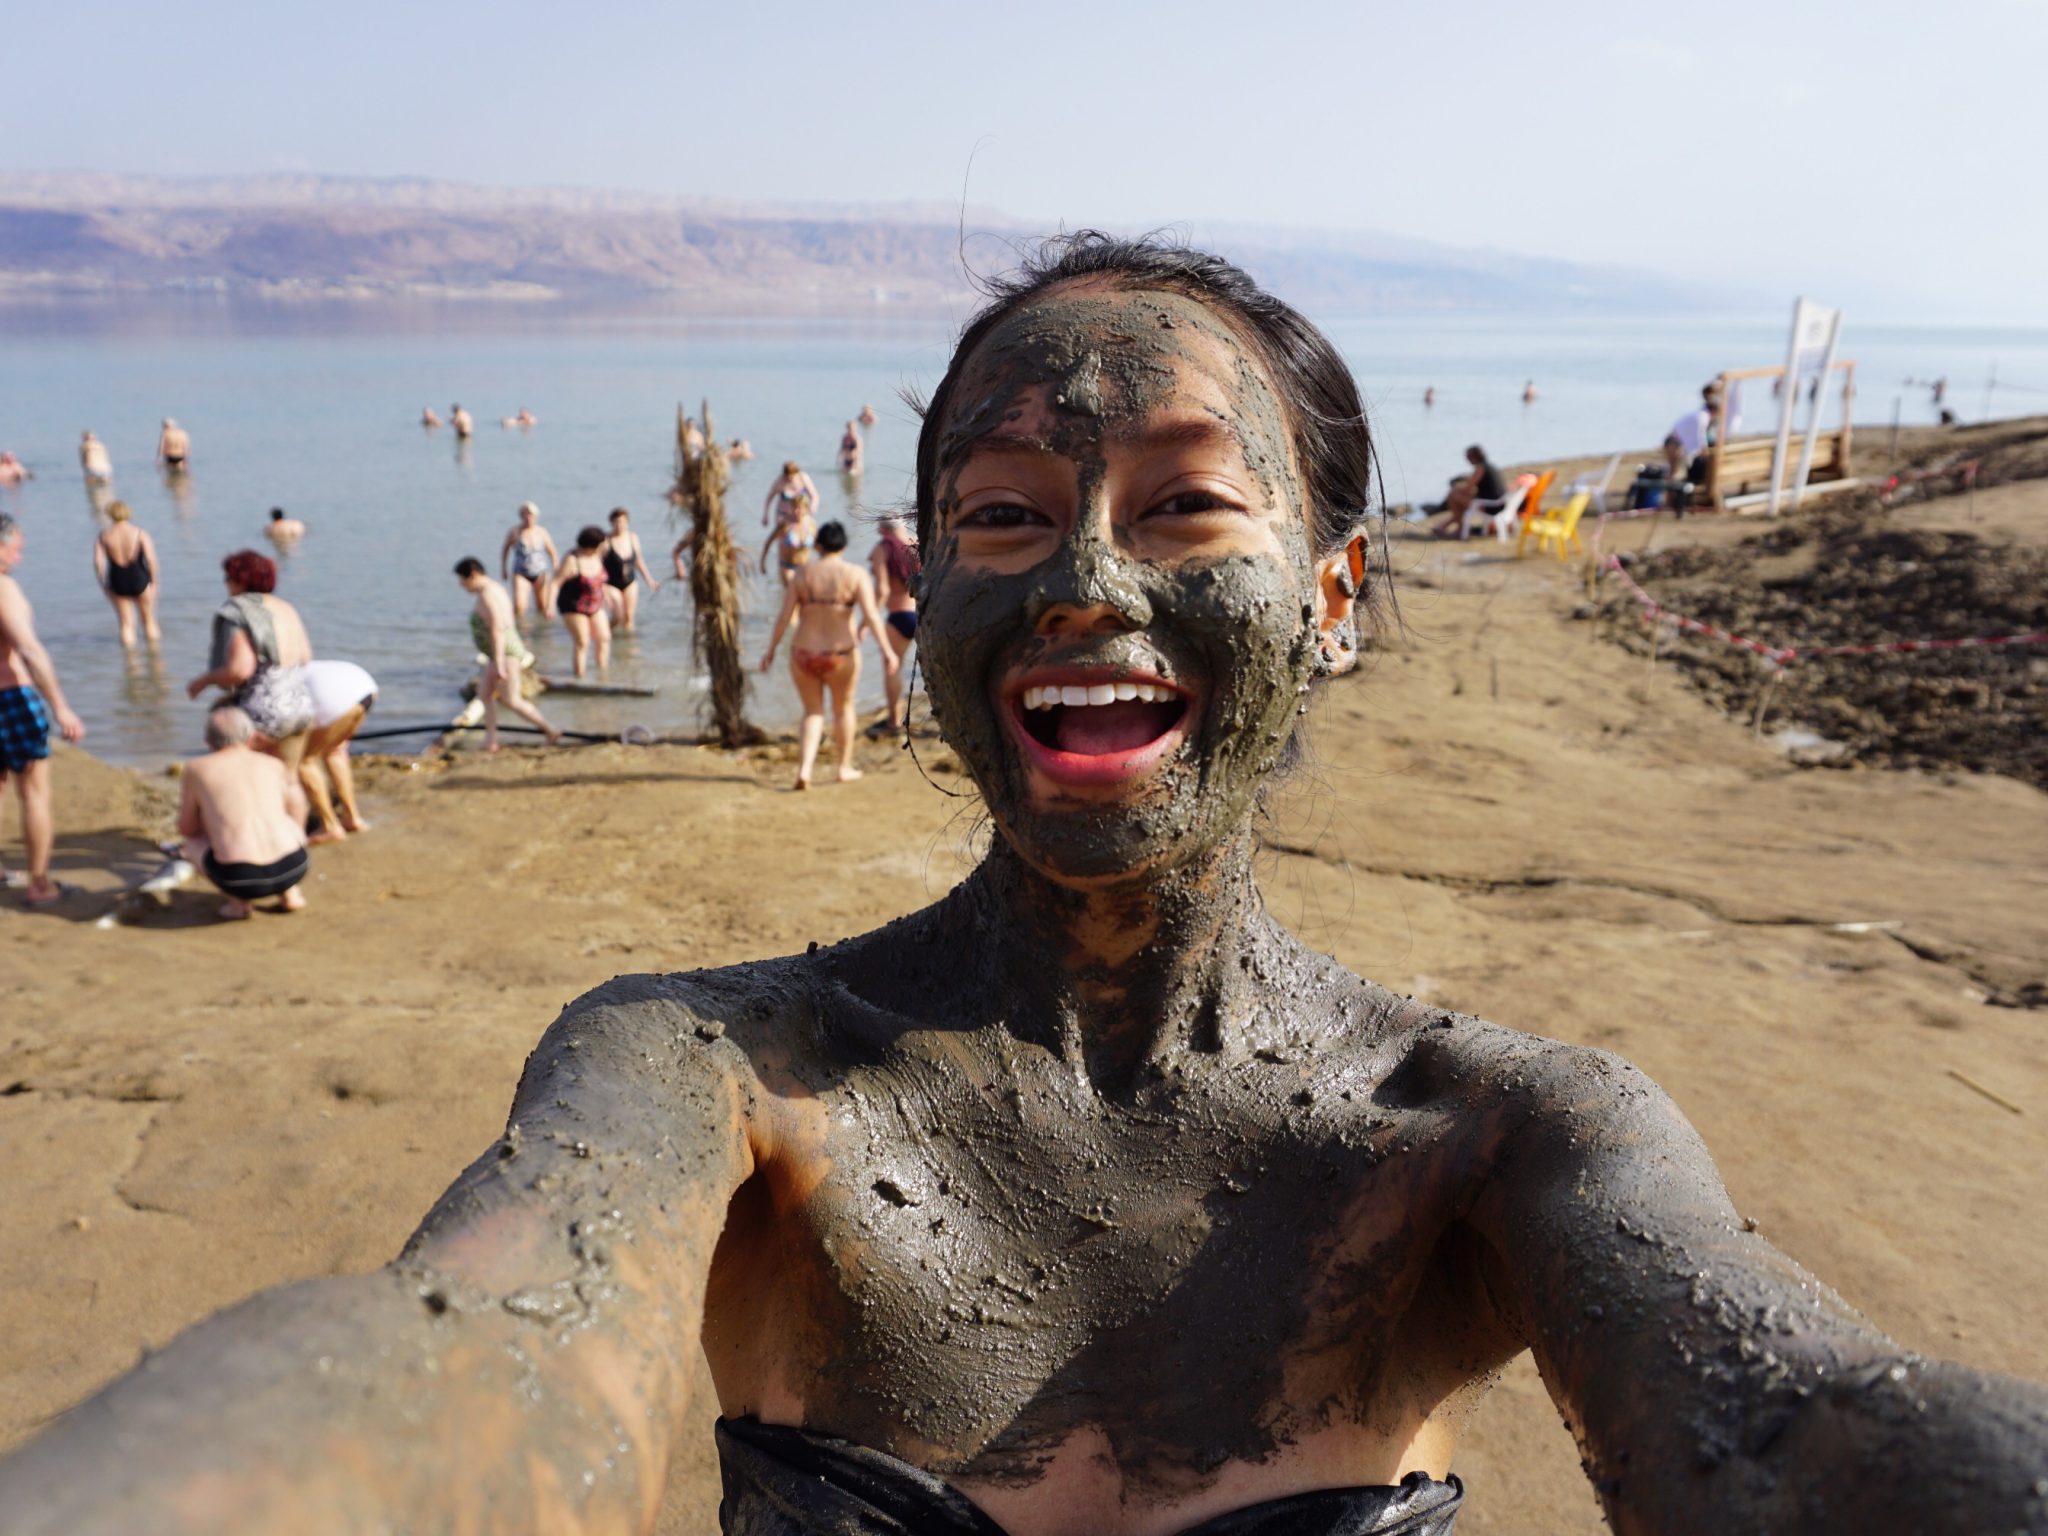 The Beginner’s Guide to the Dead Sea